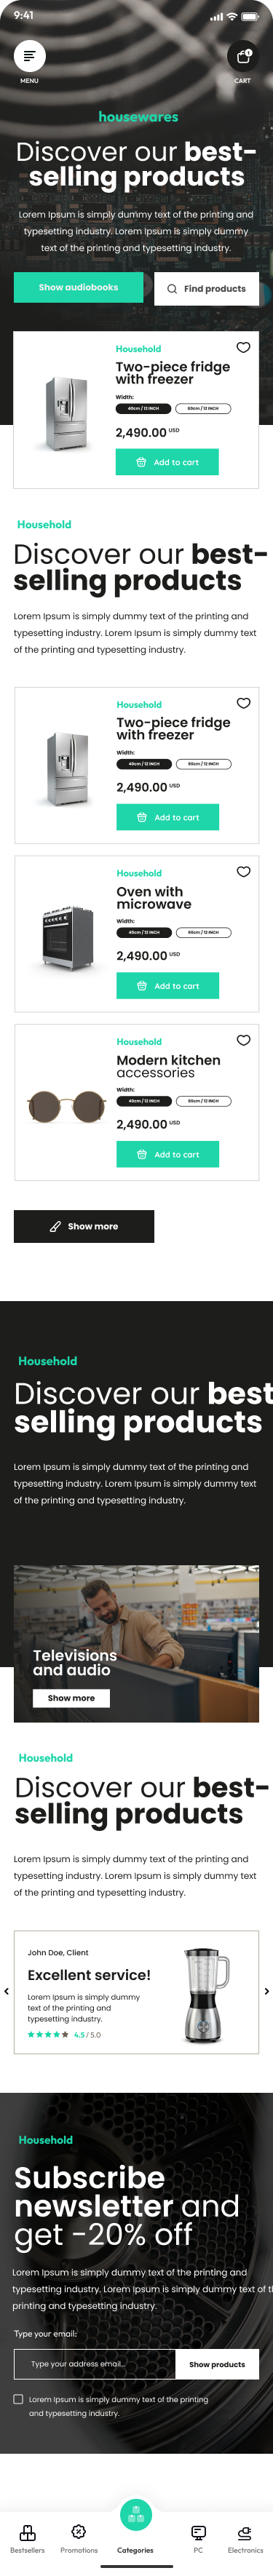 House Wares – Mobile Apps for eCommerceGo SaaS